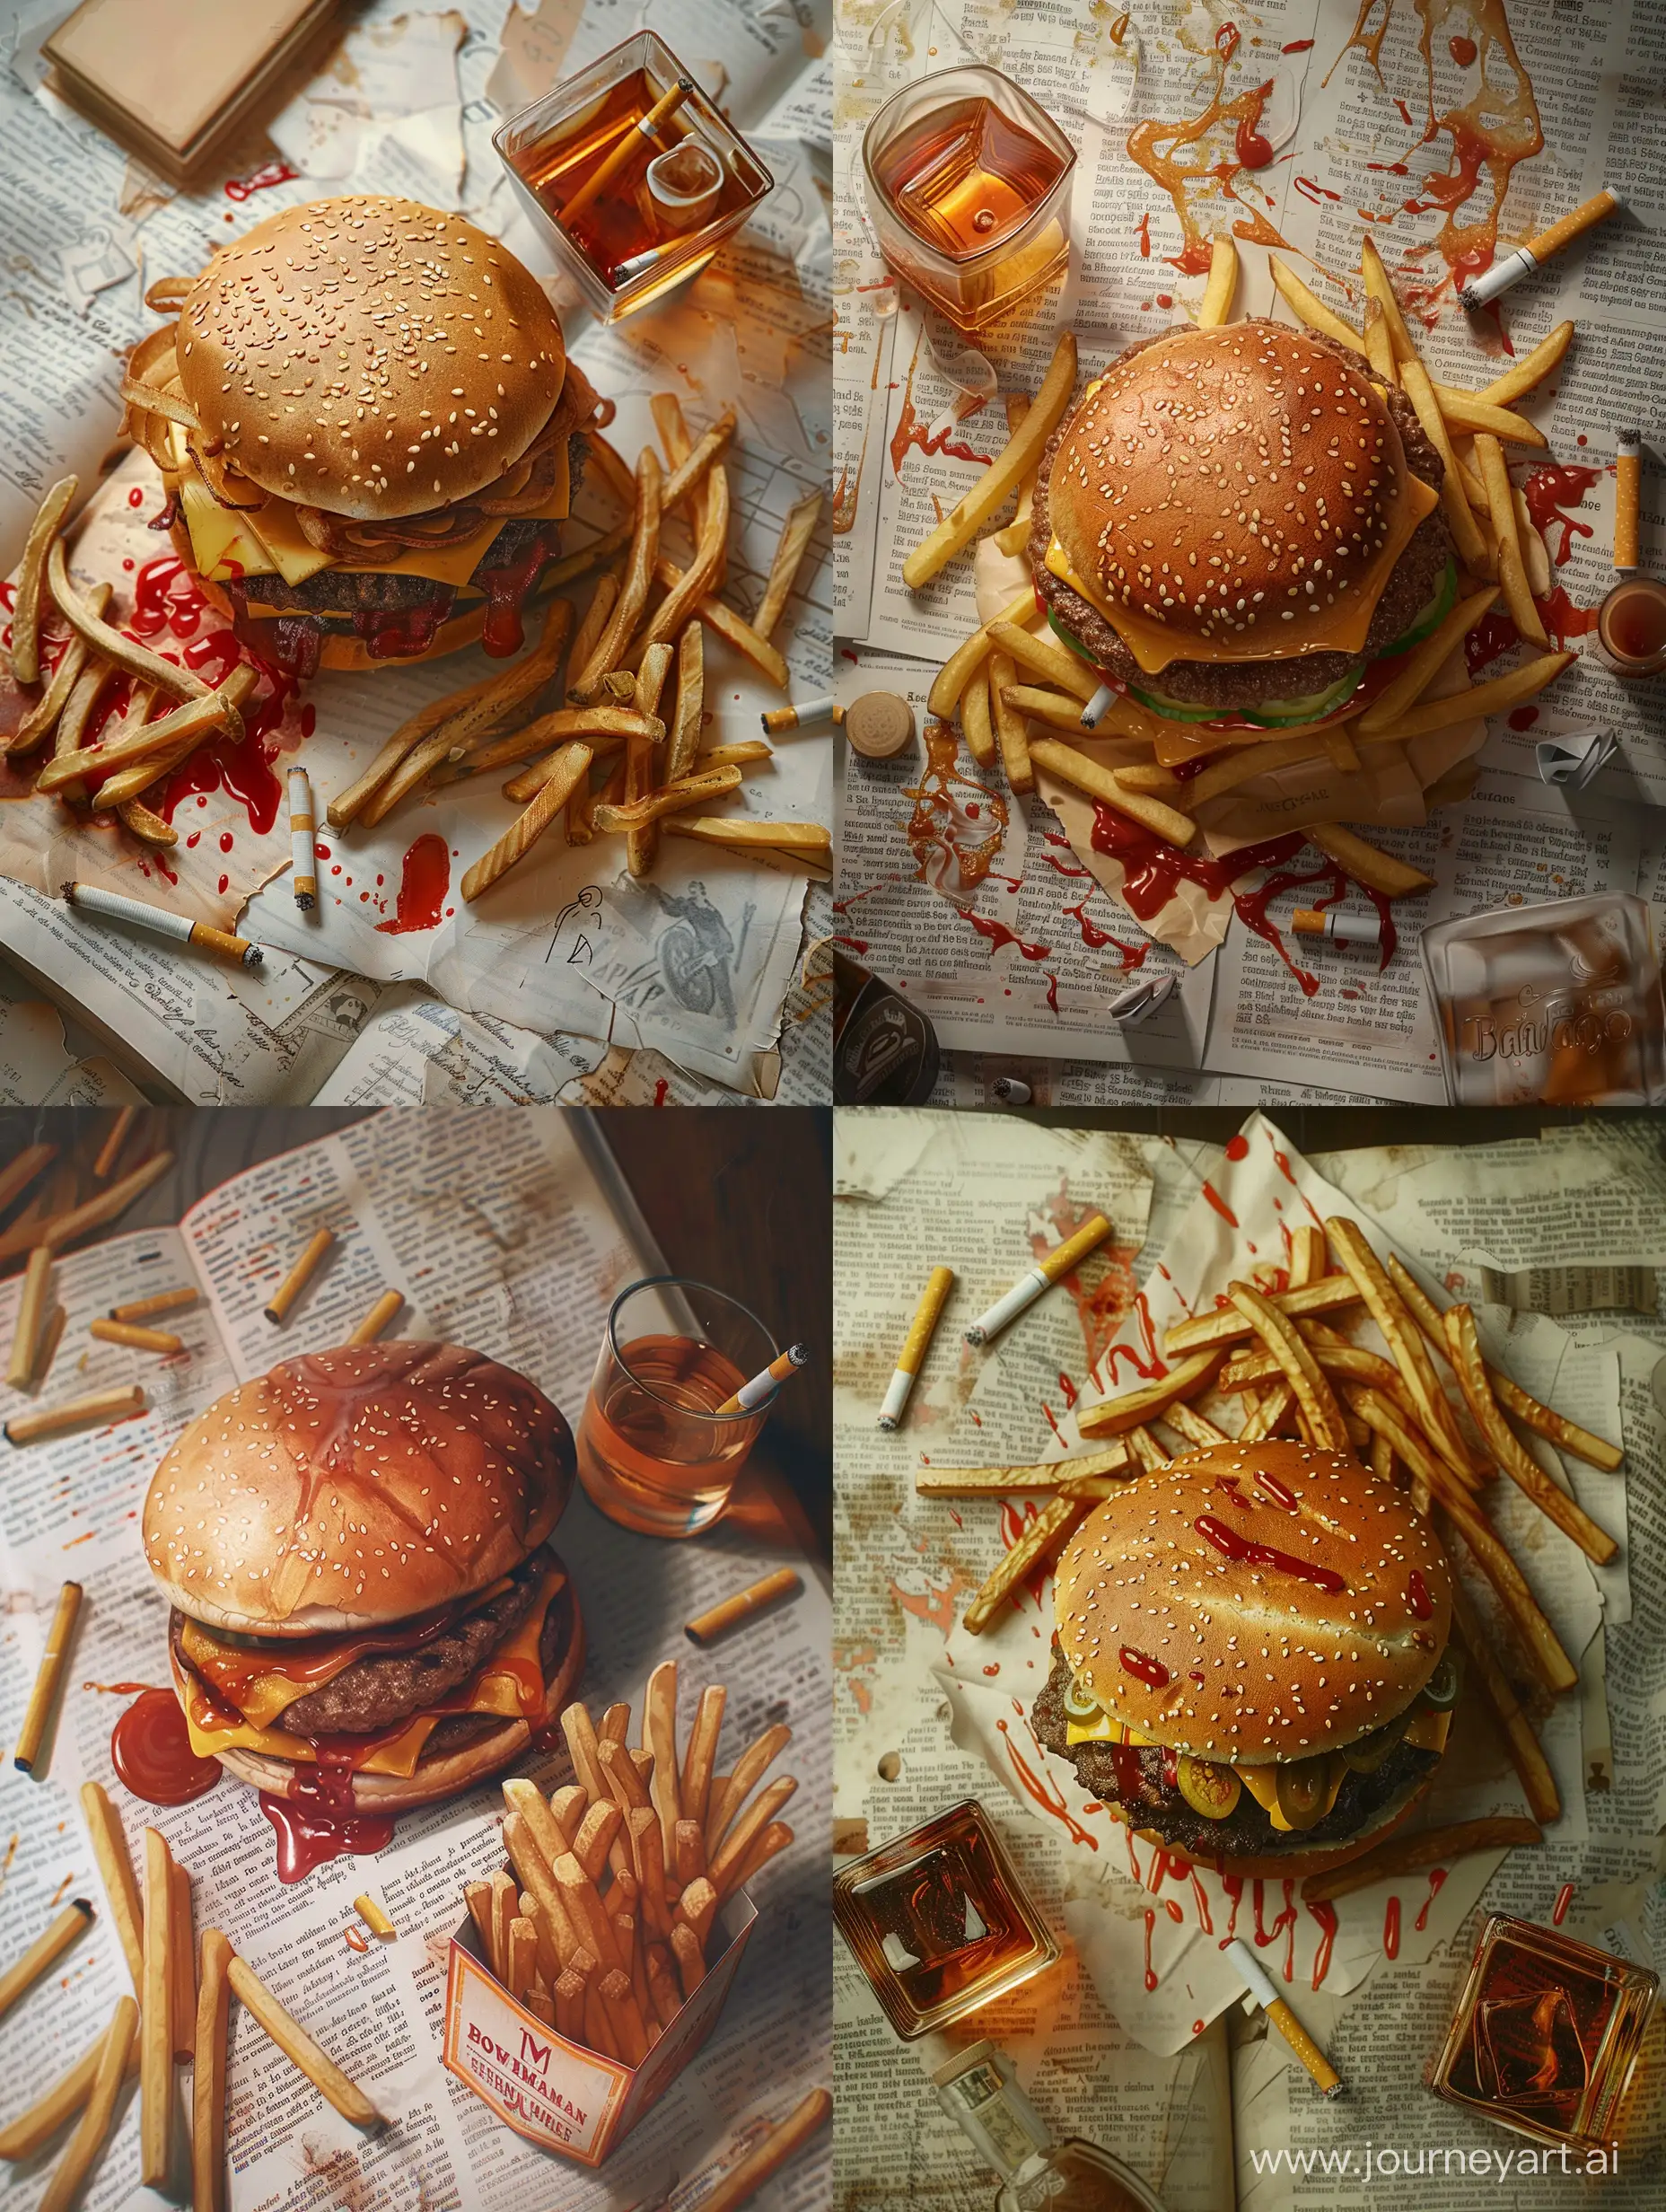 Savory-Indulgence-Overhead-View-of-a-Delectable-Burger-Feast-with-Bourbon-and-Artistic-Stains